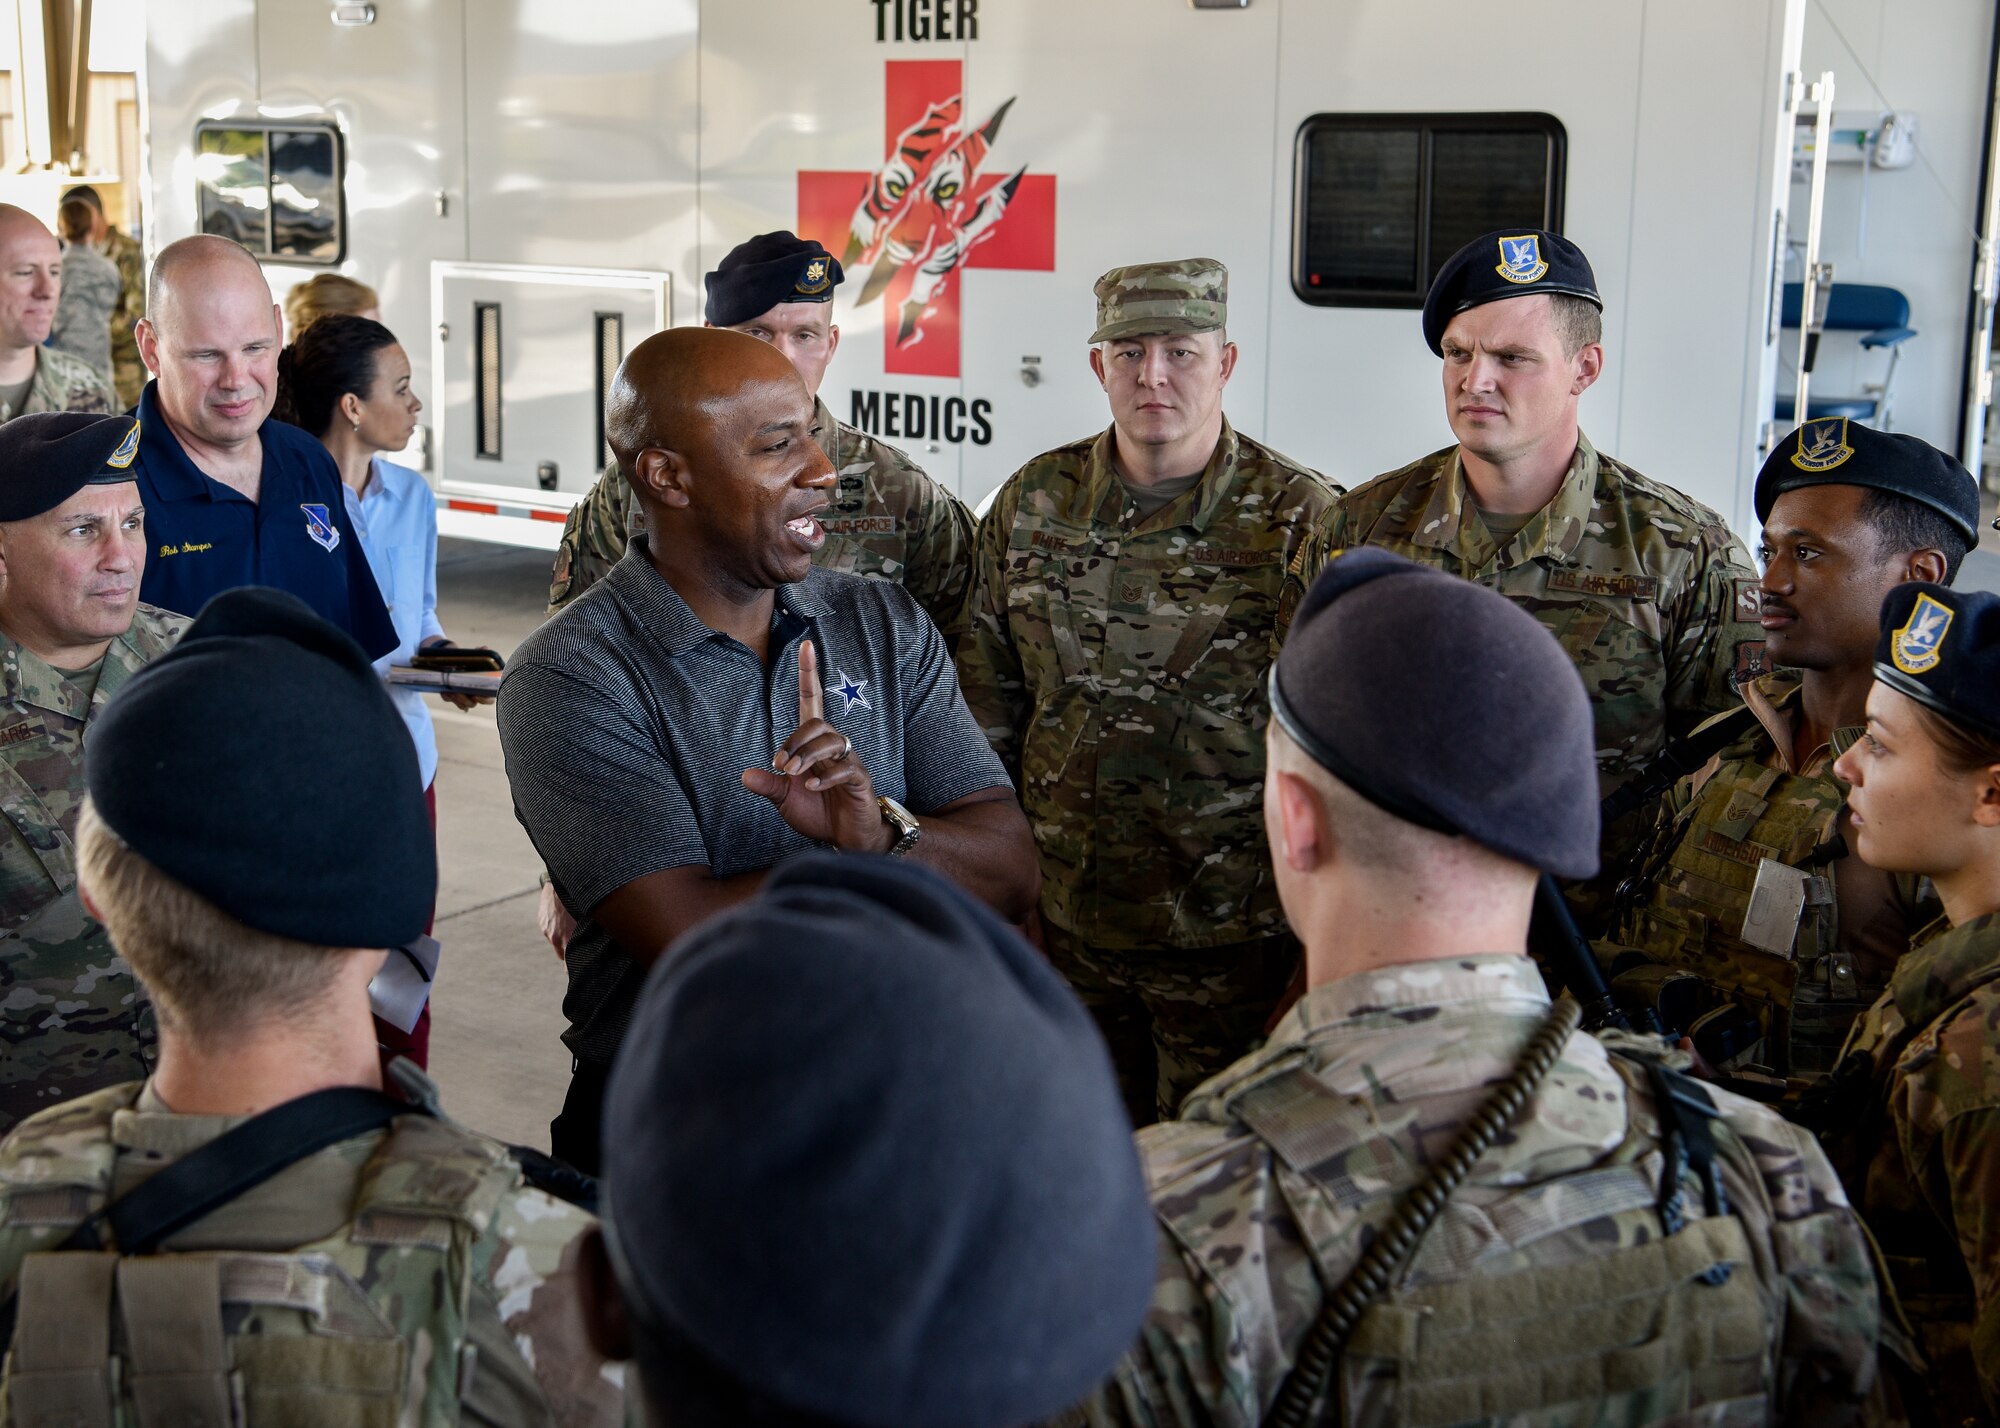 Chief Master Sgt. of the Air Force Kaleth O. Wright speaks to Defenders with the 377th Weapons System Security Squadron on how important they are to the Air Force at Kirtland Air Force Base, N.M., Sept. 28, 2019. During the tour of Kirtland AFB, Wright encouraged Airmen to know their ‘why’ and asked that they make at least two connections with fellow Airmen after he left. (U.S. Air Force photo by Airman 1st Class Austin J. Prisbrey)